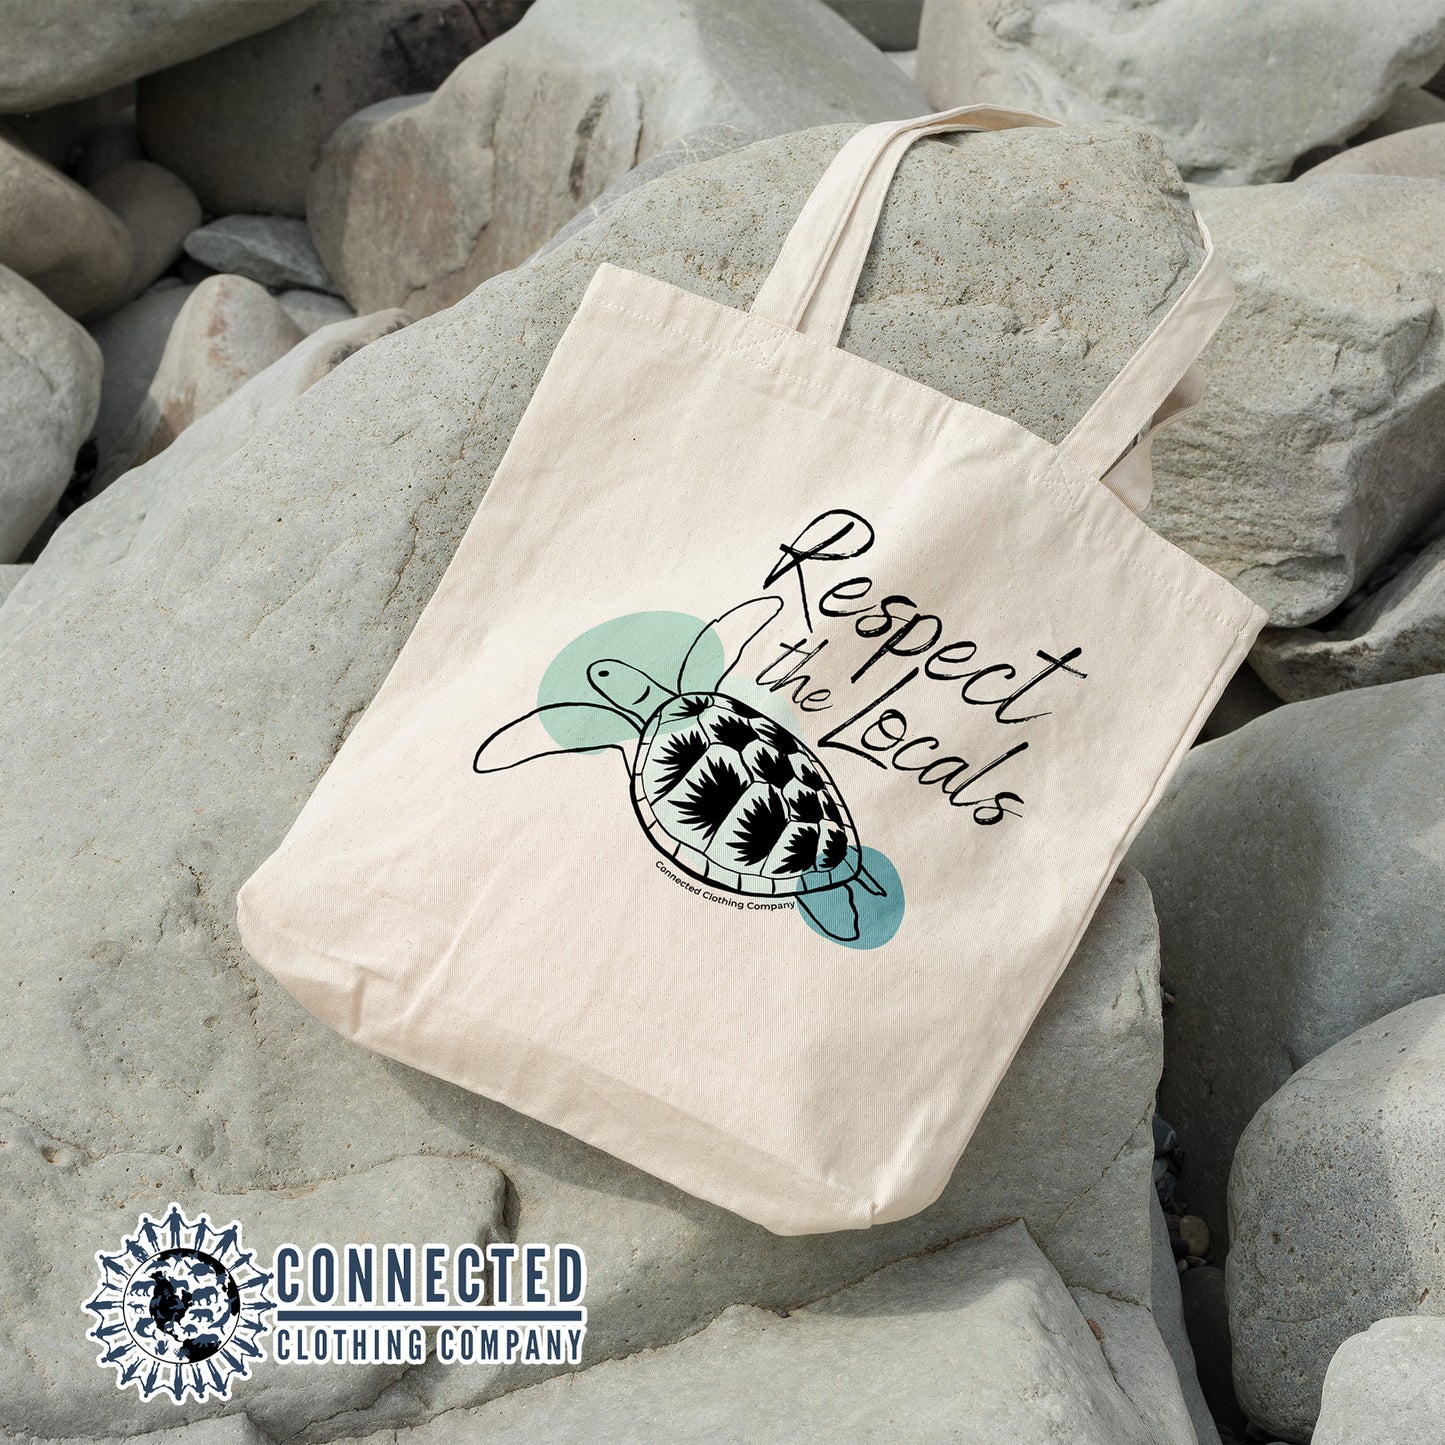 Respect The Locals Sea Turtle Tote Bag - Connected Clothing Company - 10% of proceeds donated to sea turtle conservation